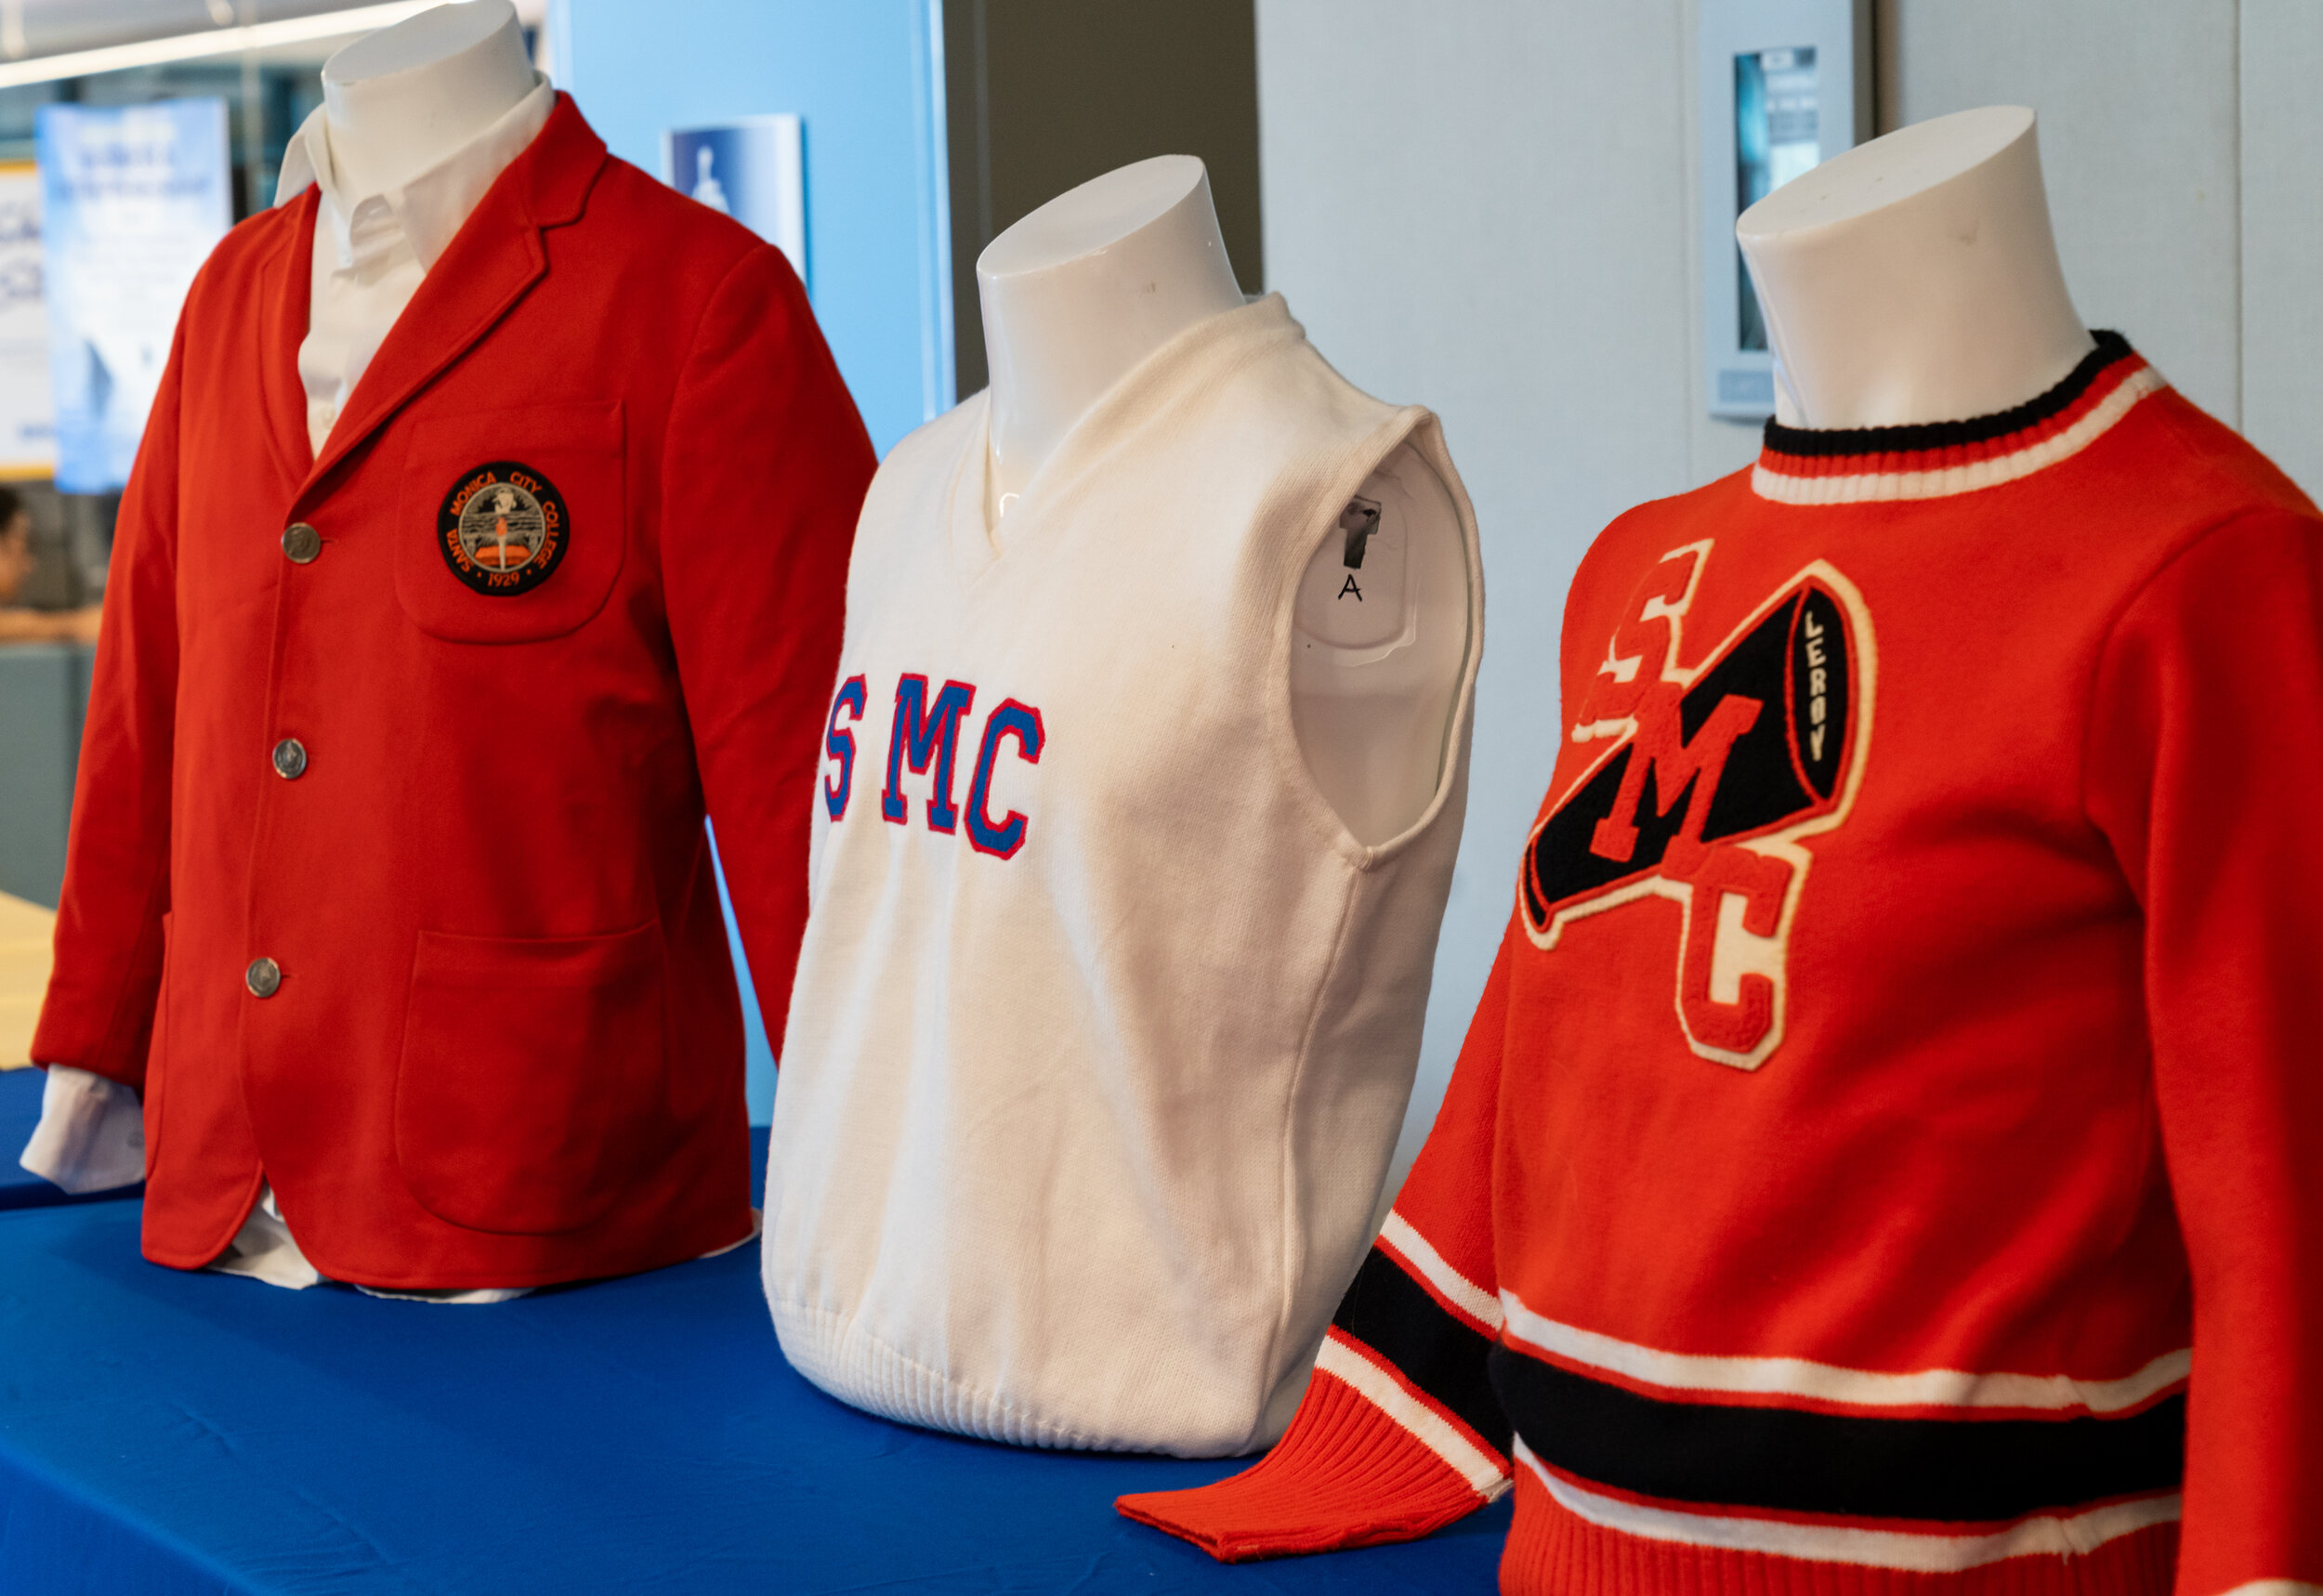  Vintage Santa Monica College clothing on display at the ribbon cutting ceremony  for the new Student Services Center and 90th Anniversary Celebration at the Santa Monica College main campus on October 22, 2019.  (Suzanne Steiner/The Corsair) 